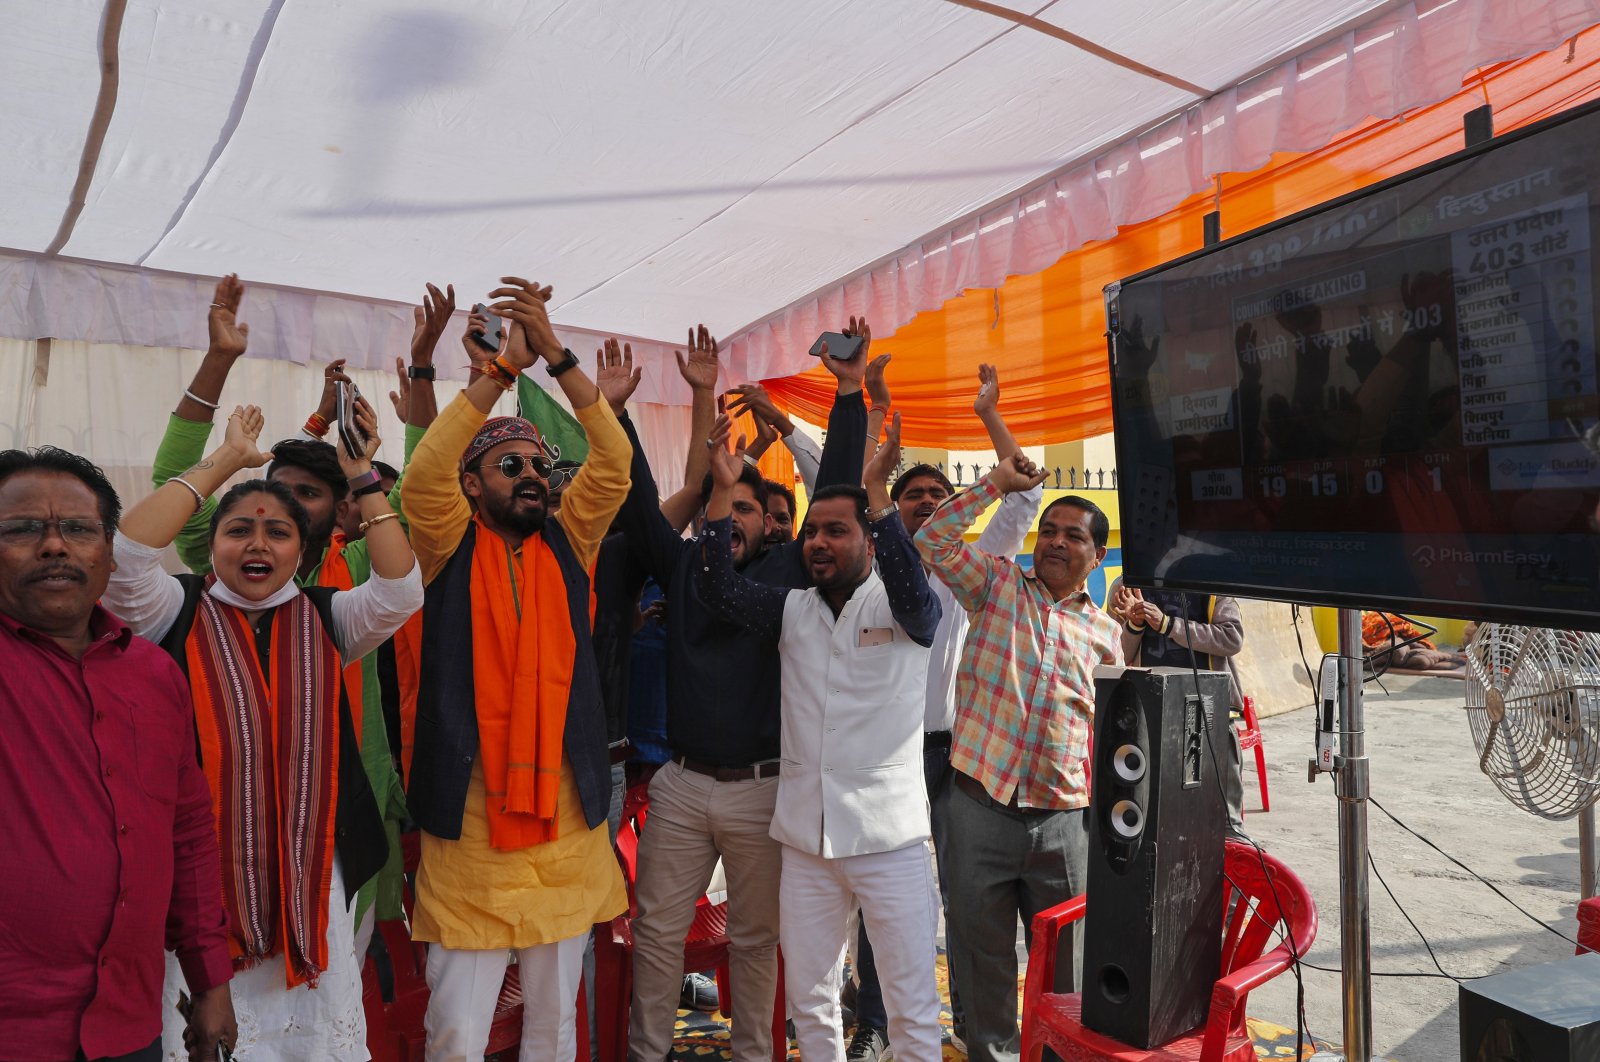 Bharatiya Janata Party (BJP) workers celebrate early leads for the party as election officials count votes after Uttar Pradesh state elections in Lucknow, India, March 10, 2022. (AP Photo)